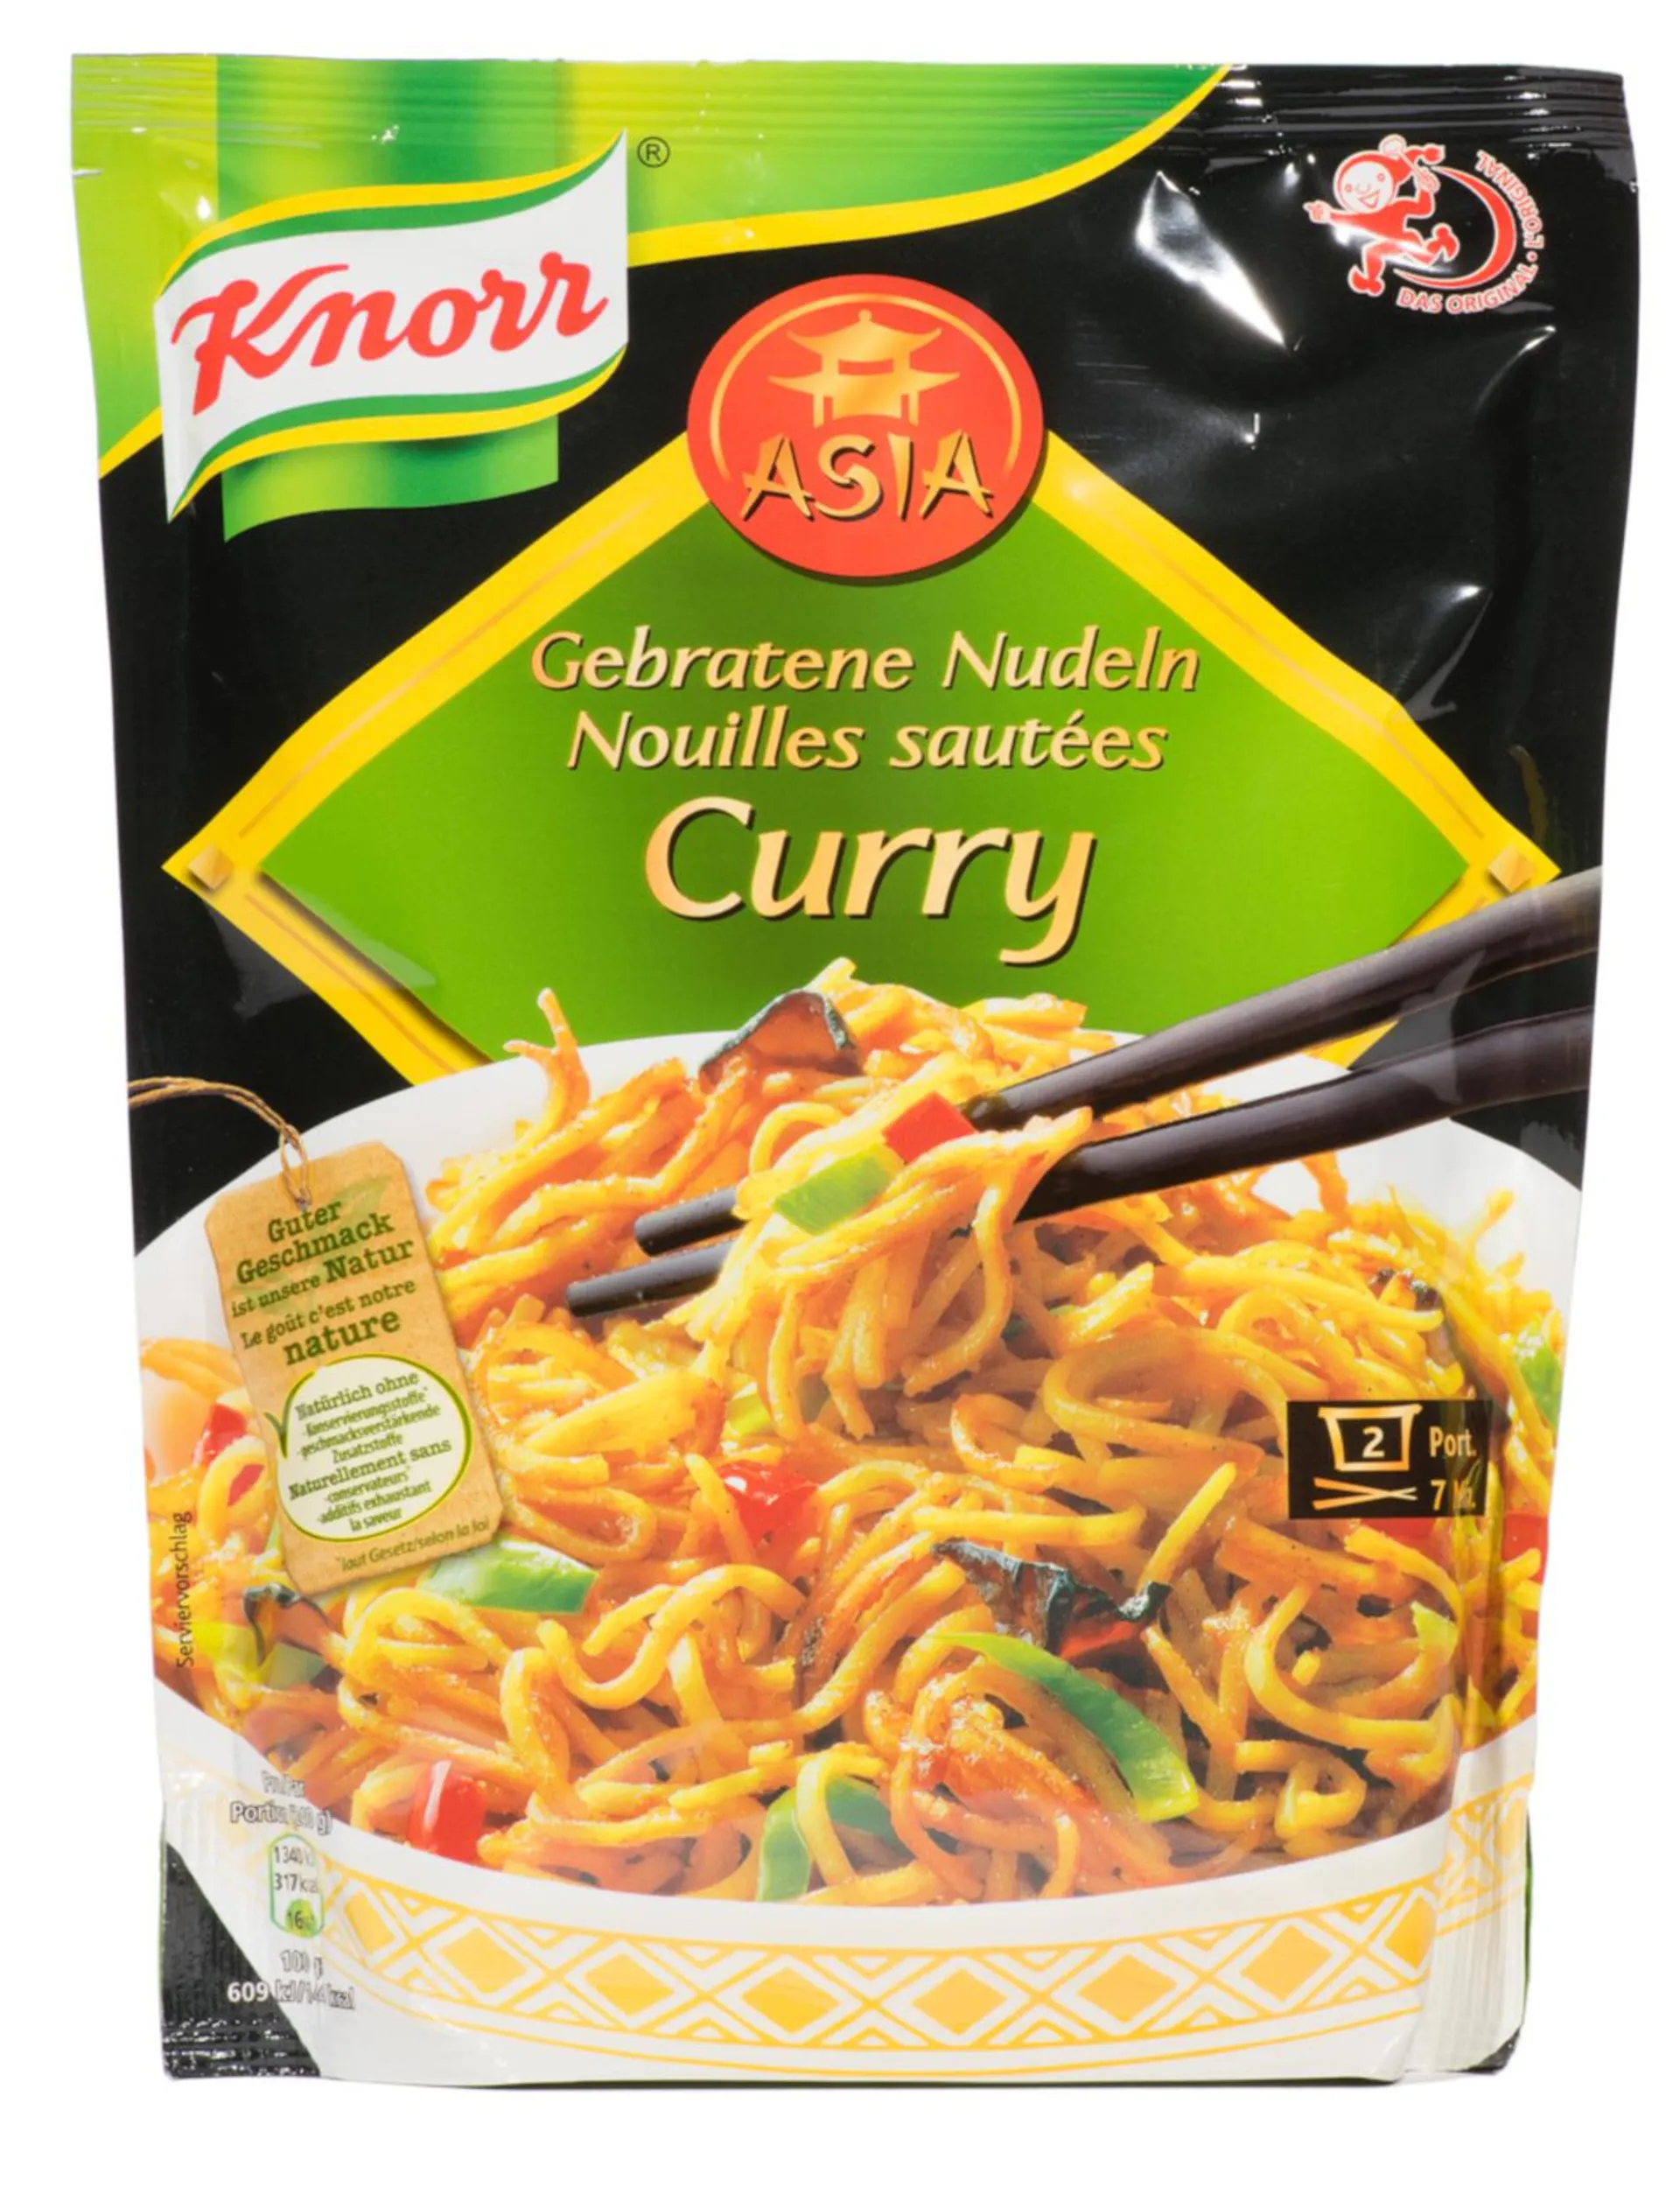 Knorr Nudeln Curry Asia 148 g